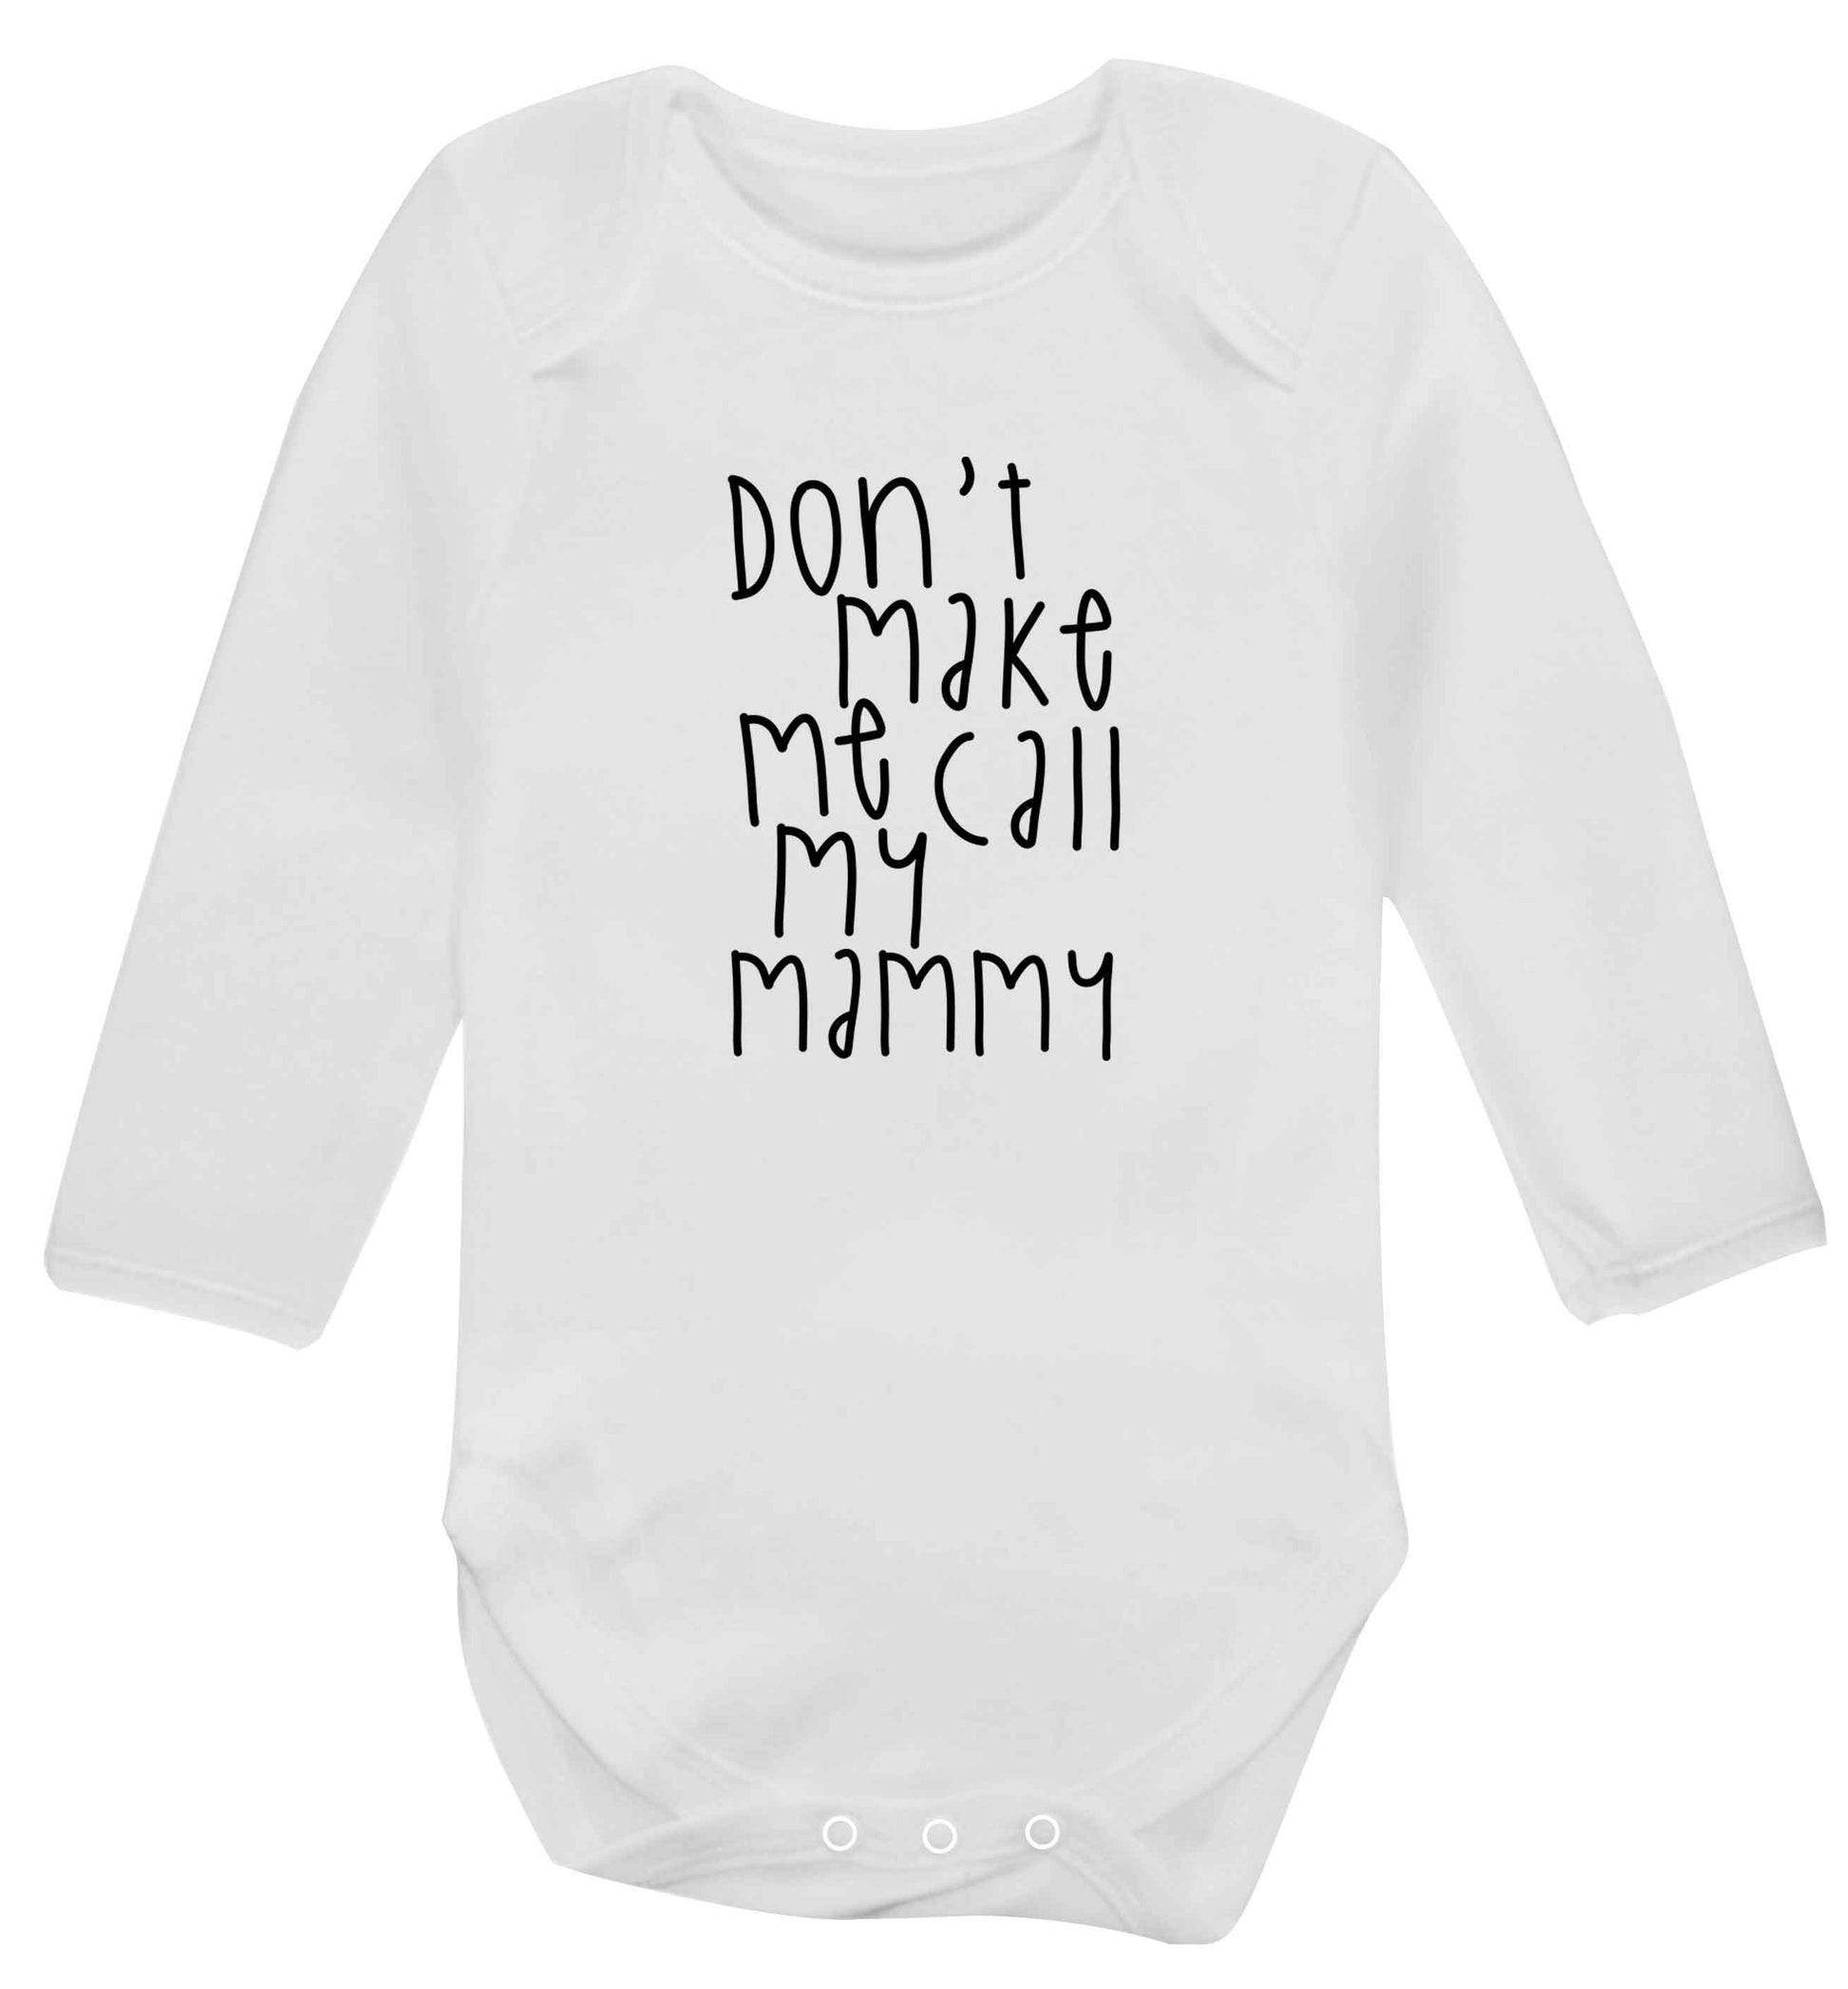 Don't make me call my mammy baby vest long sleeved white 6-12 months